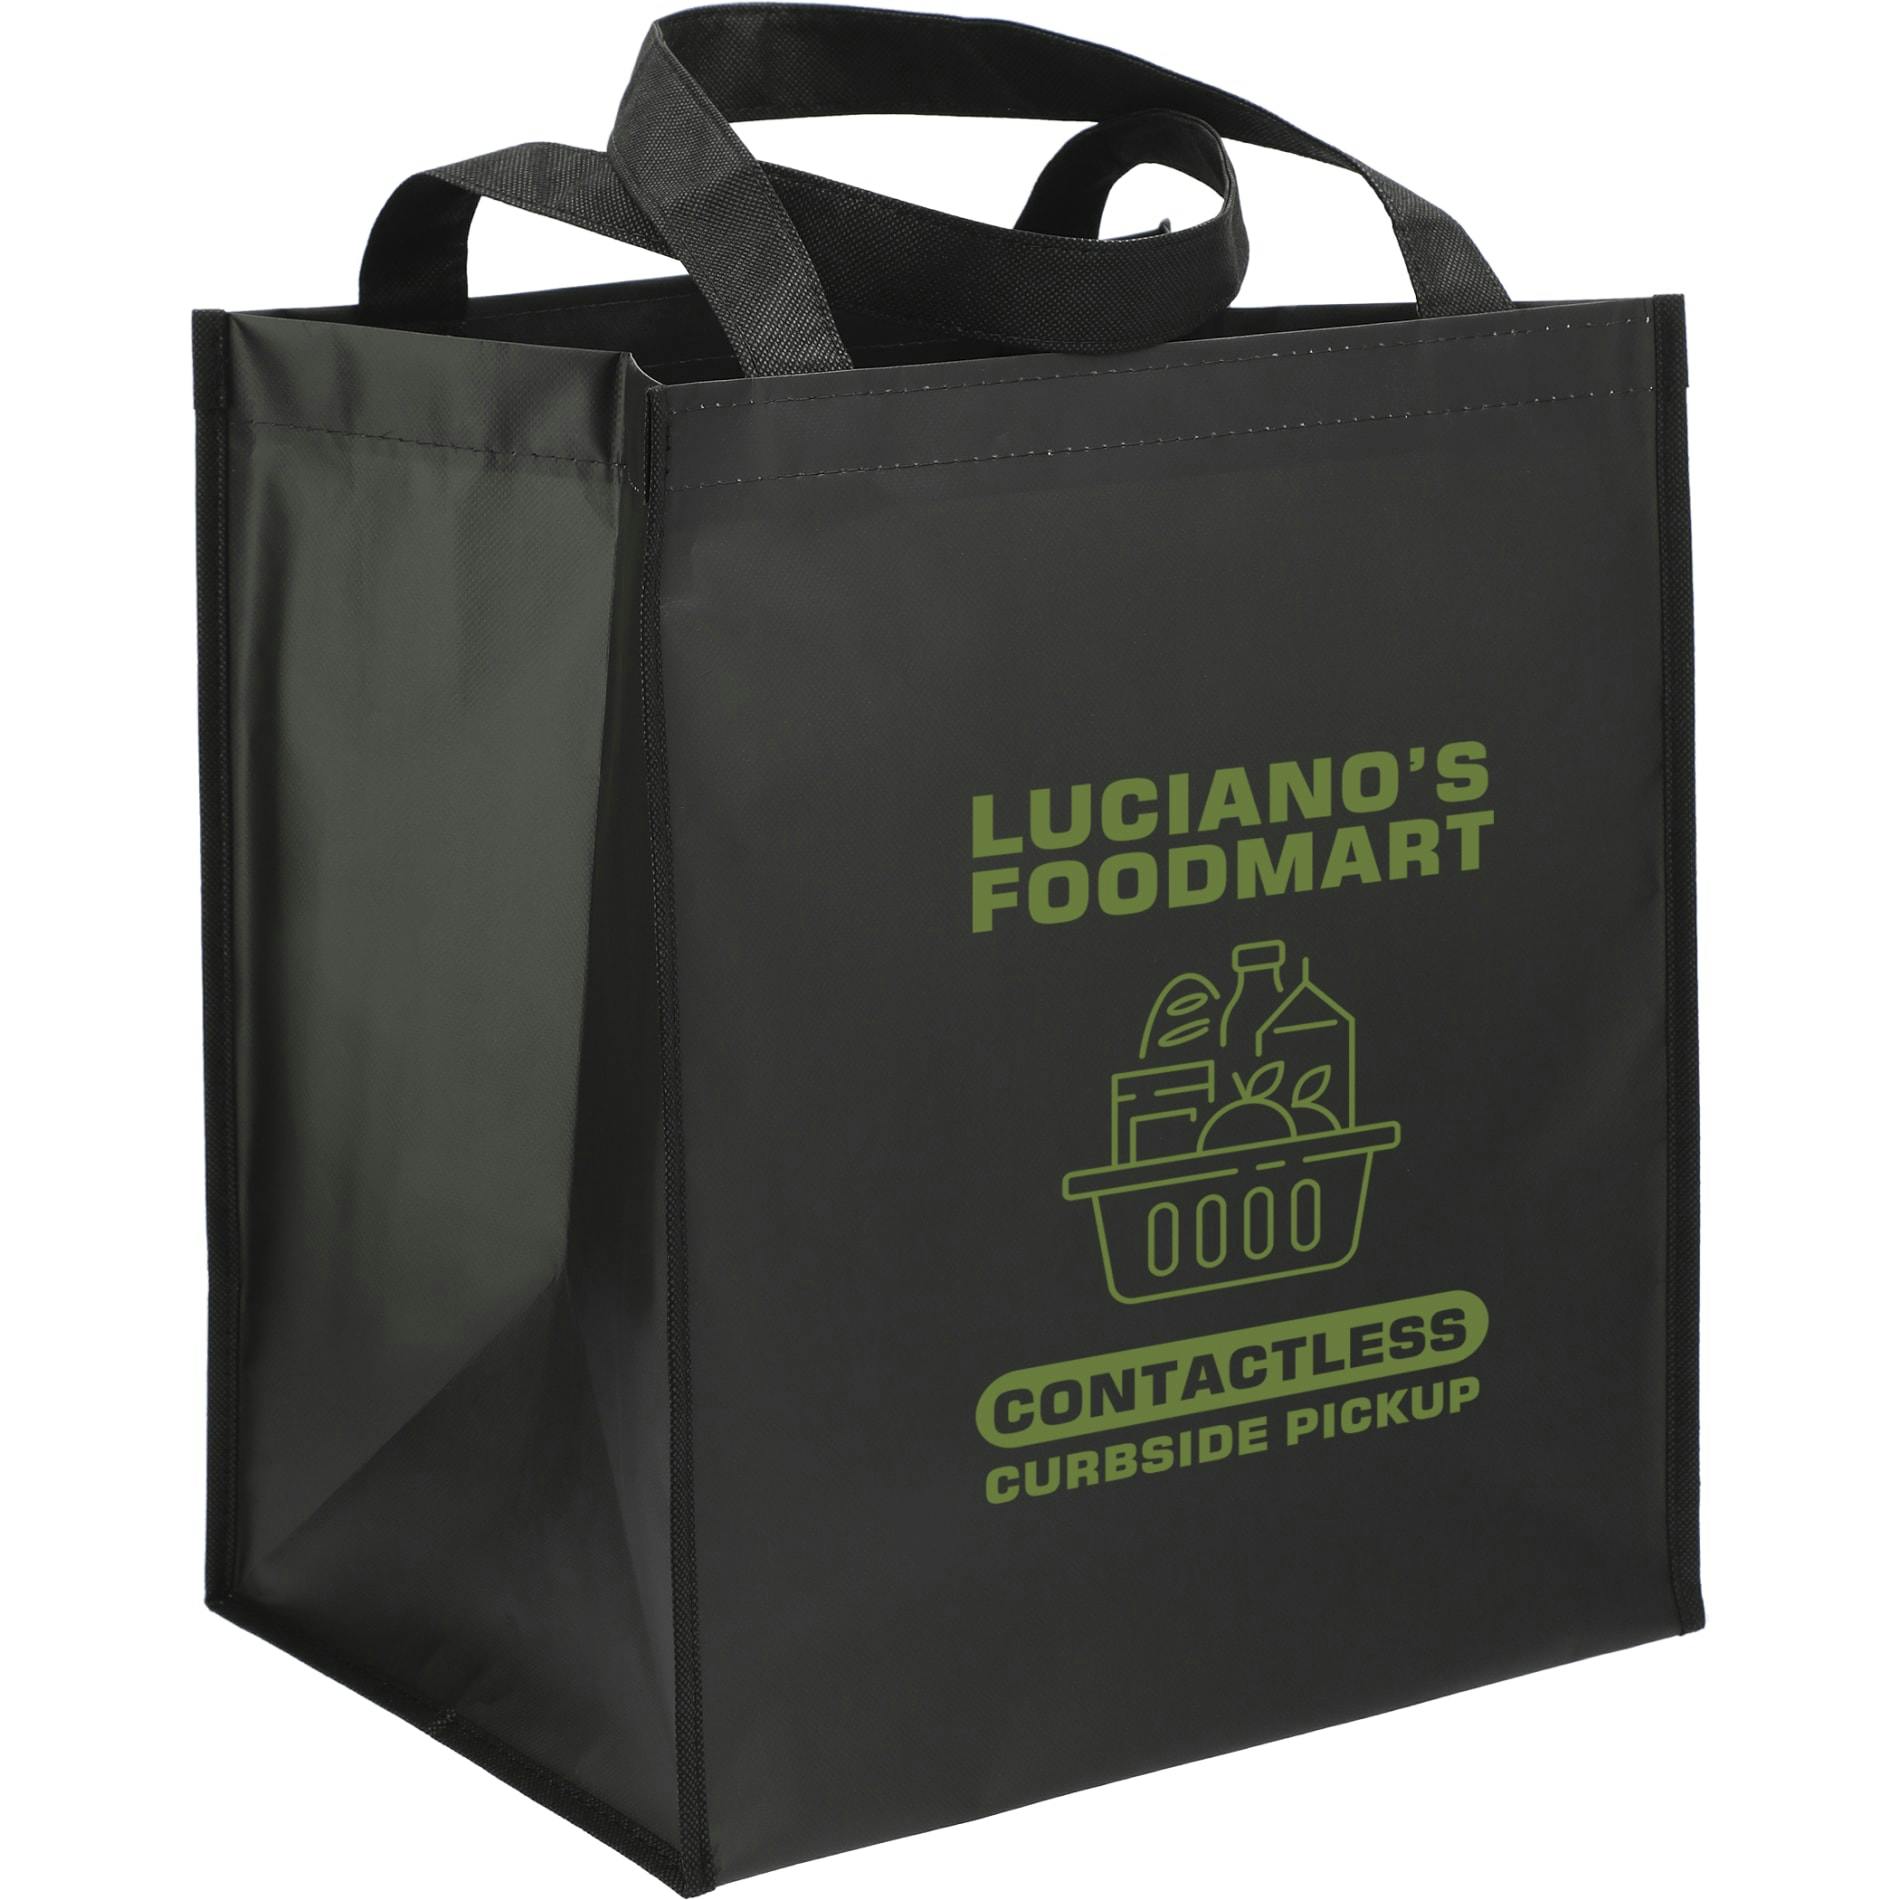 Double Laminated Wipeable Grocery Tote - additional Image 2